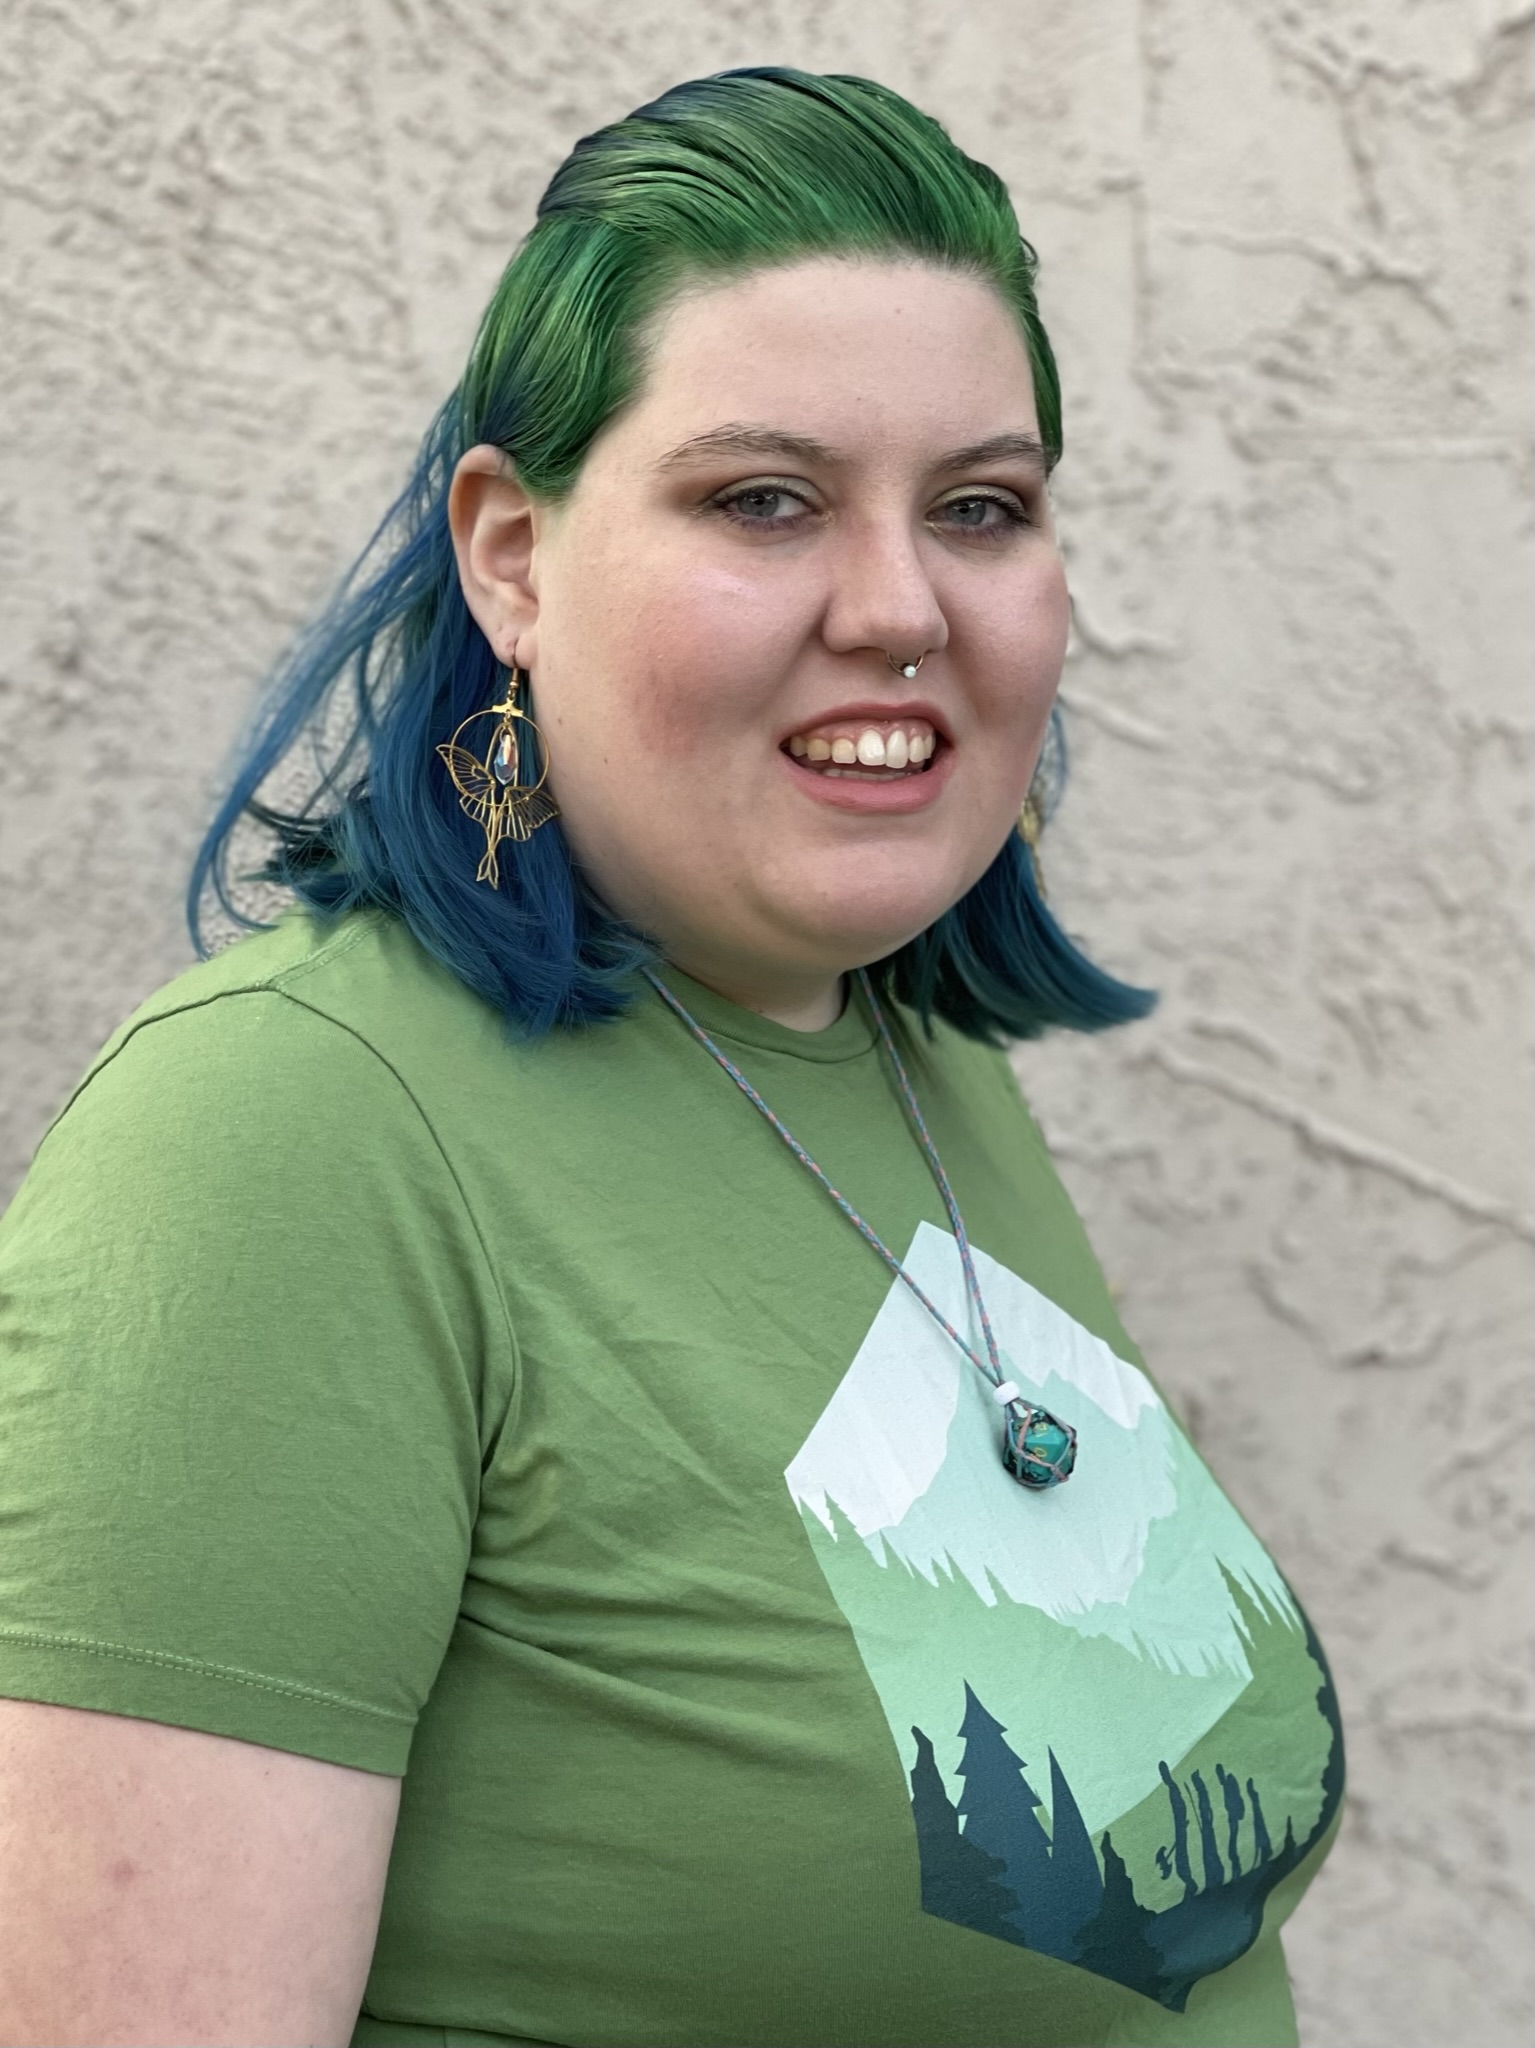 Image of Elise in a green shirt against a gray background.